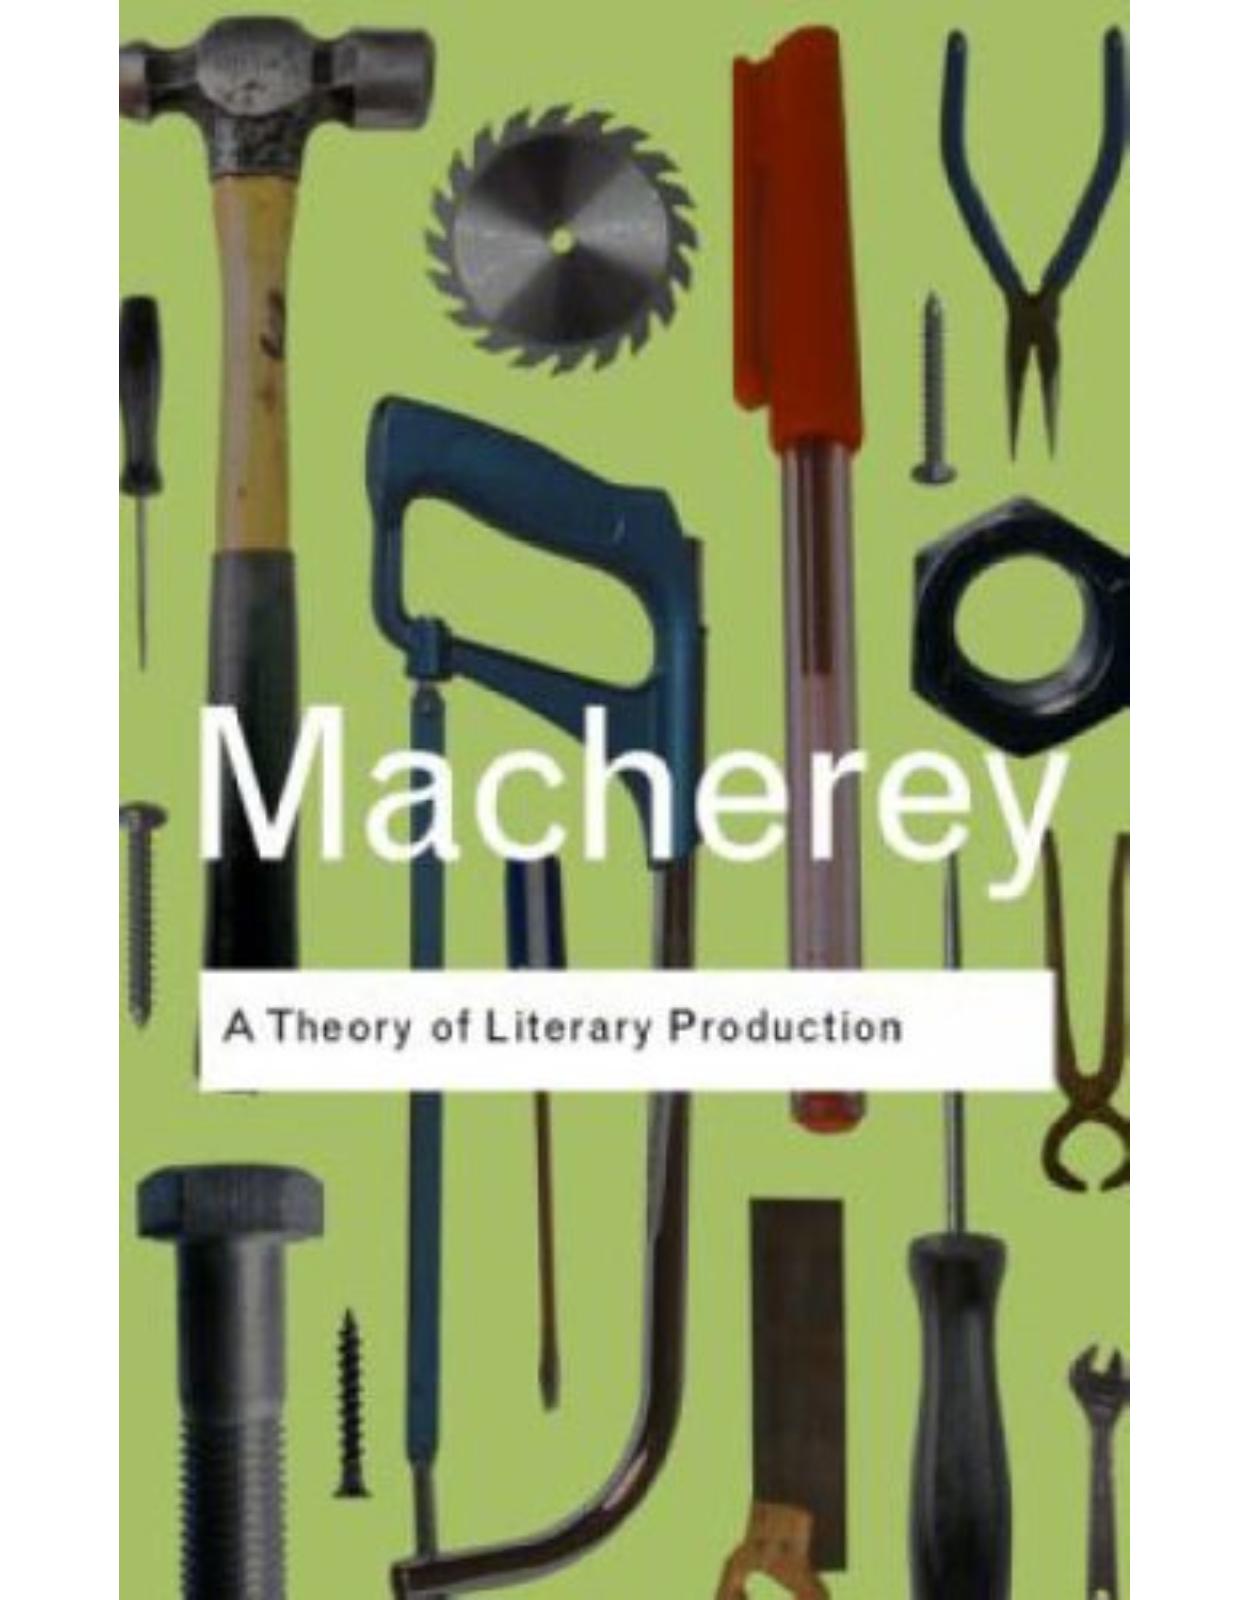 A theory of literary production